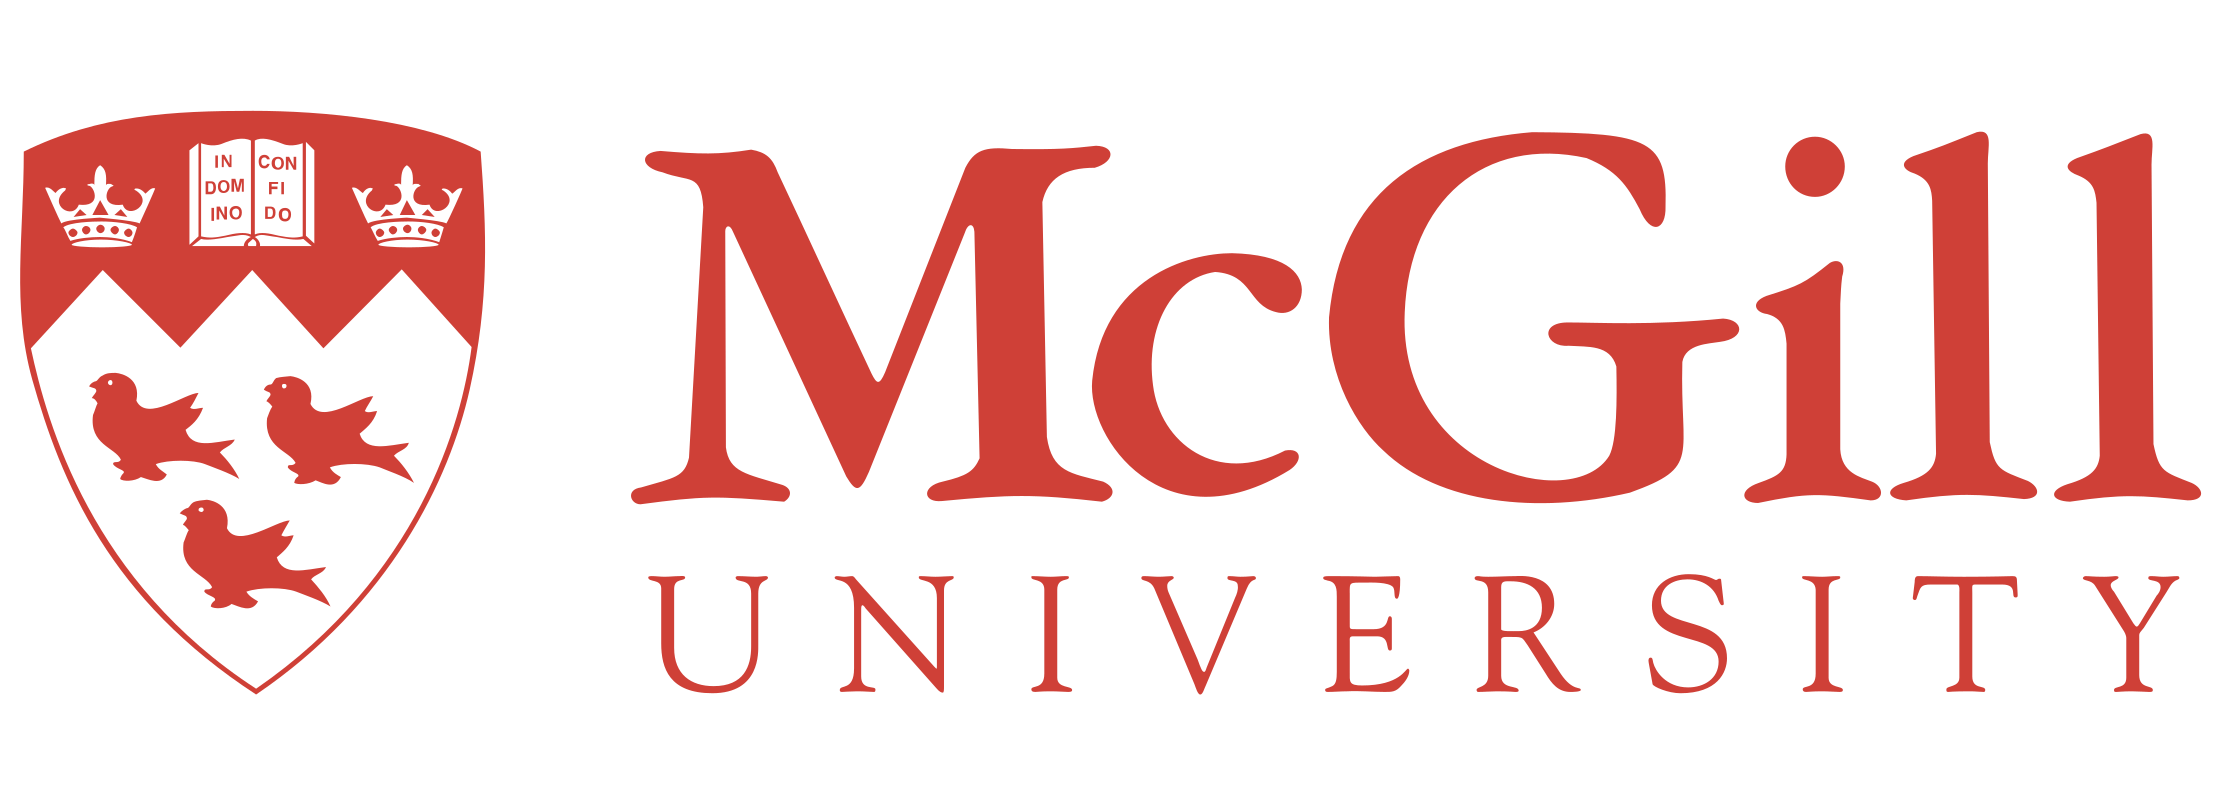 Global Food Security | Bachelor's degree | Health & Well-Being | On Campus | McGill University | Canada